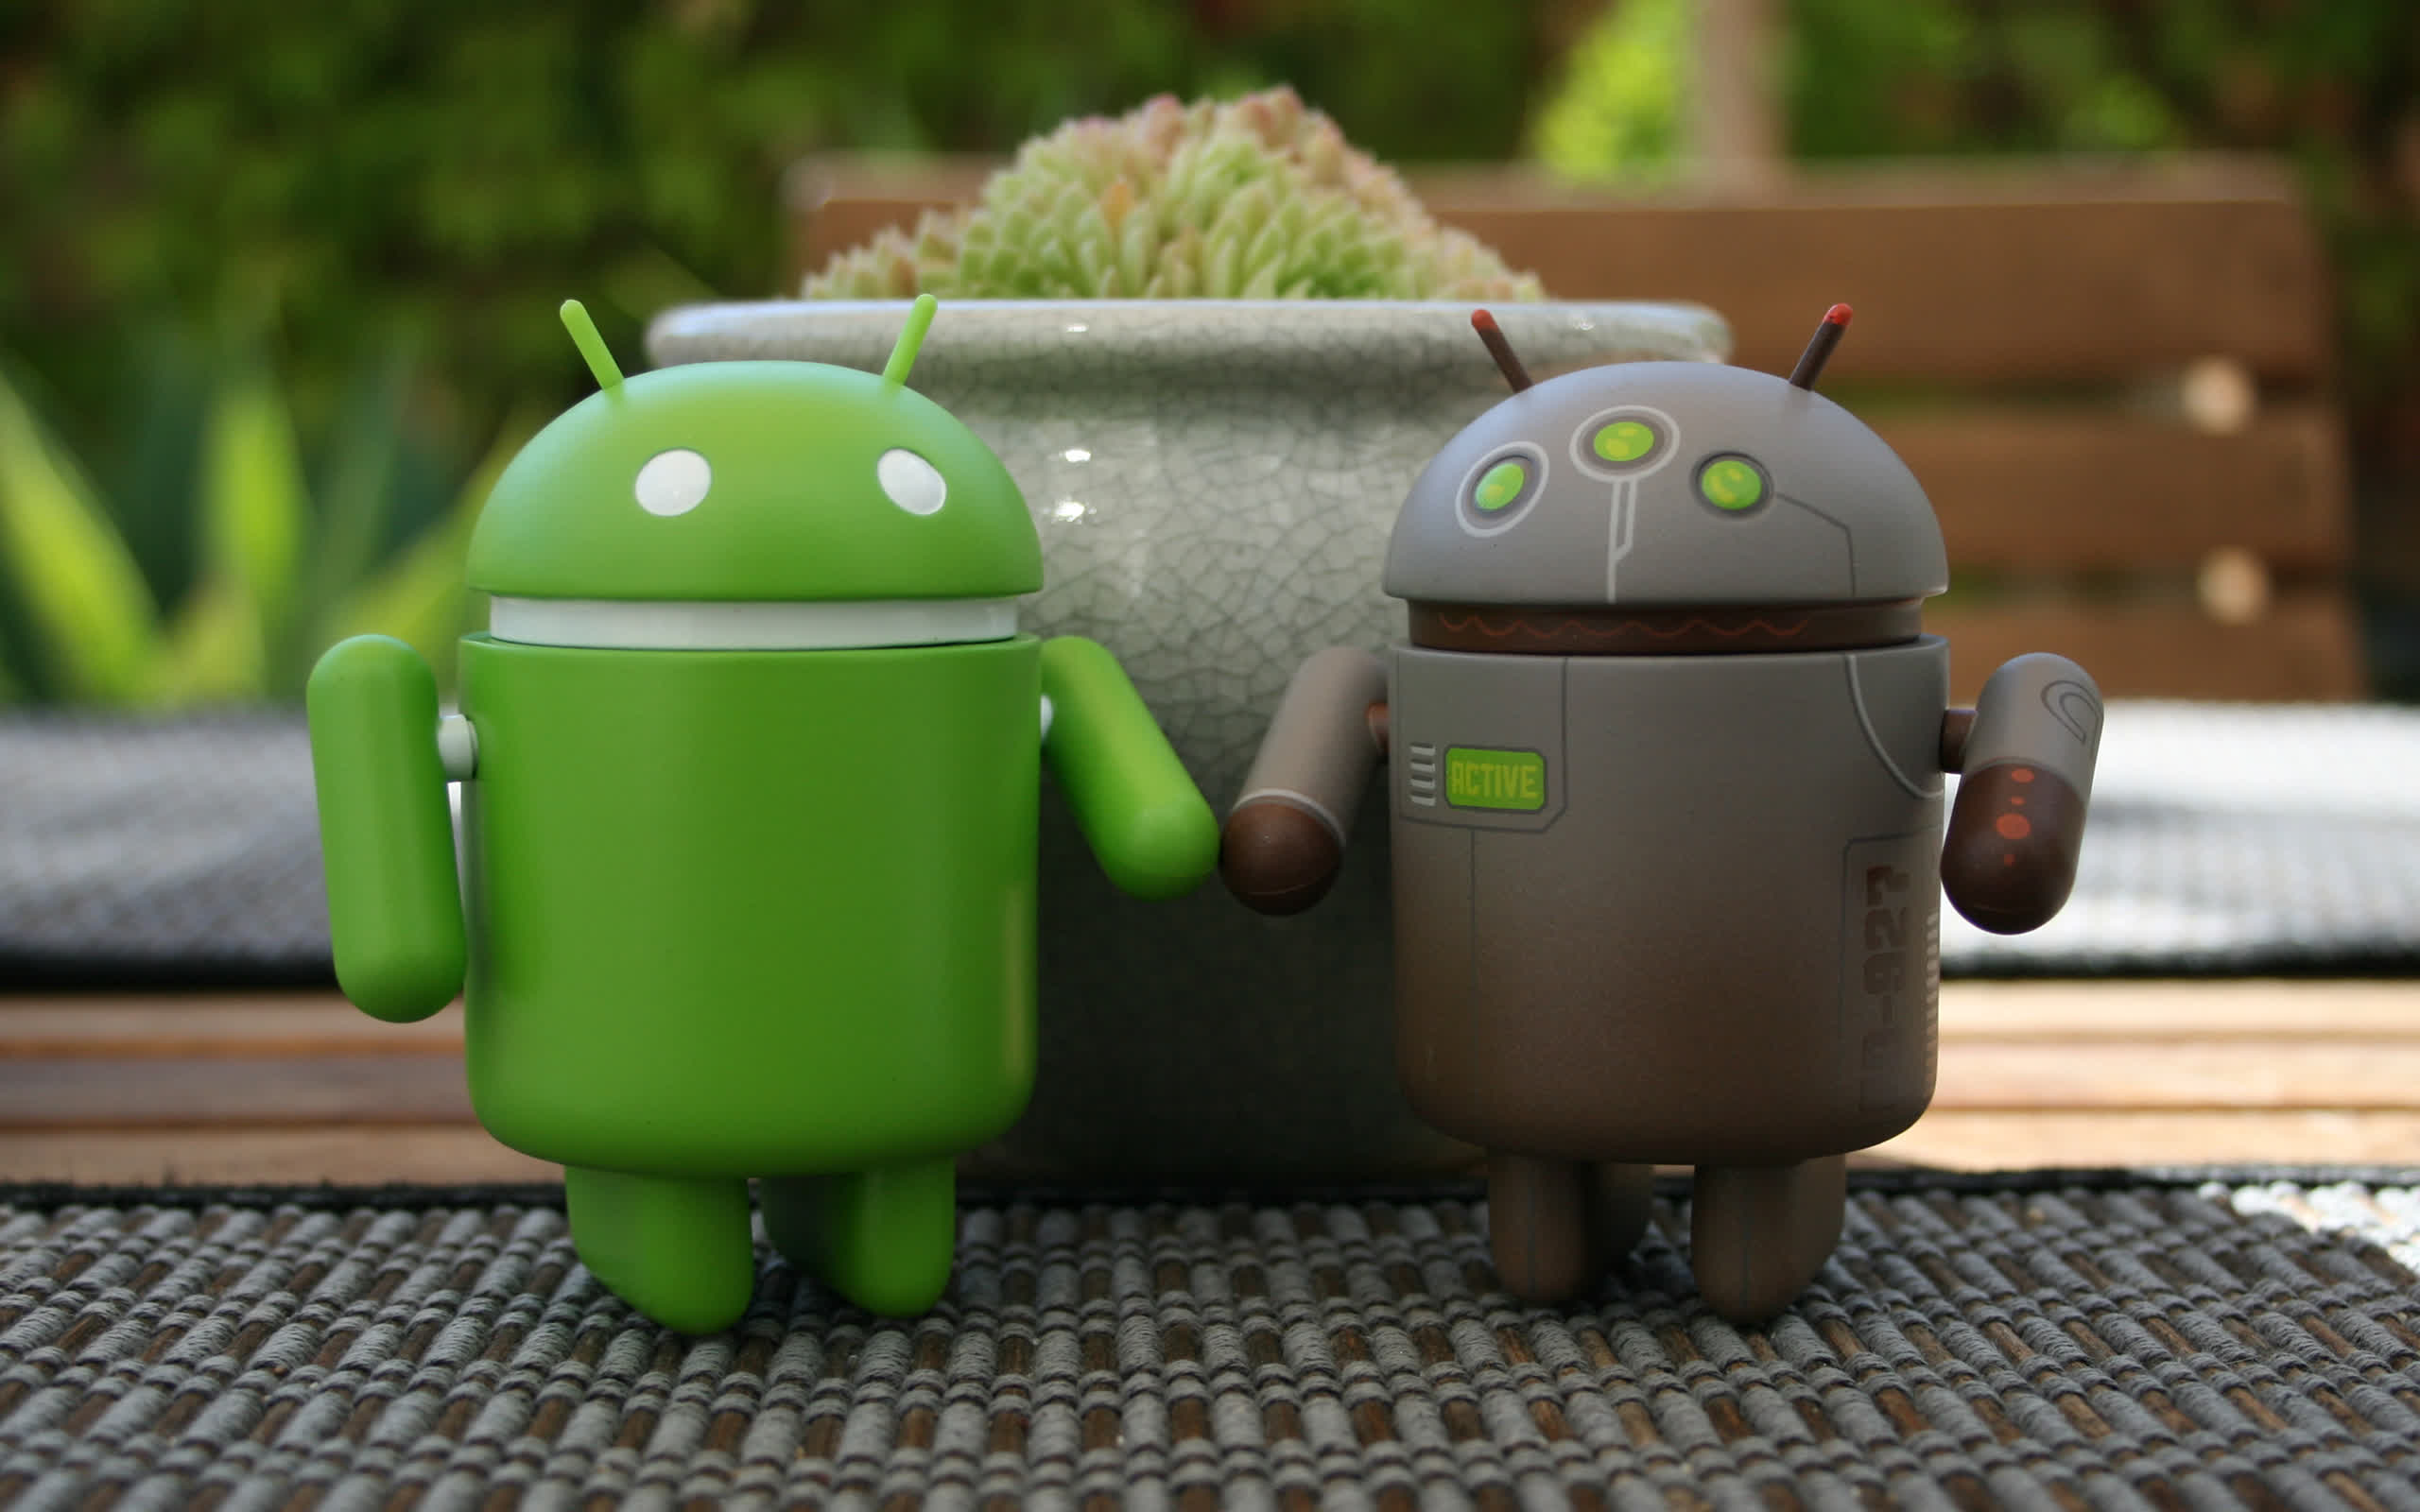 Does Android need saving? If yes, here's how to do it.